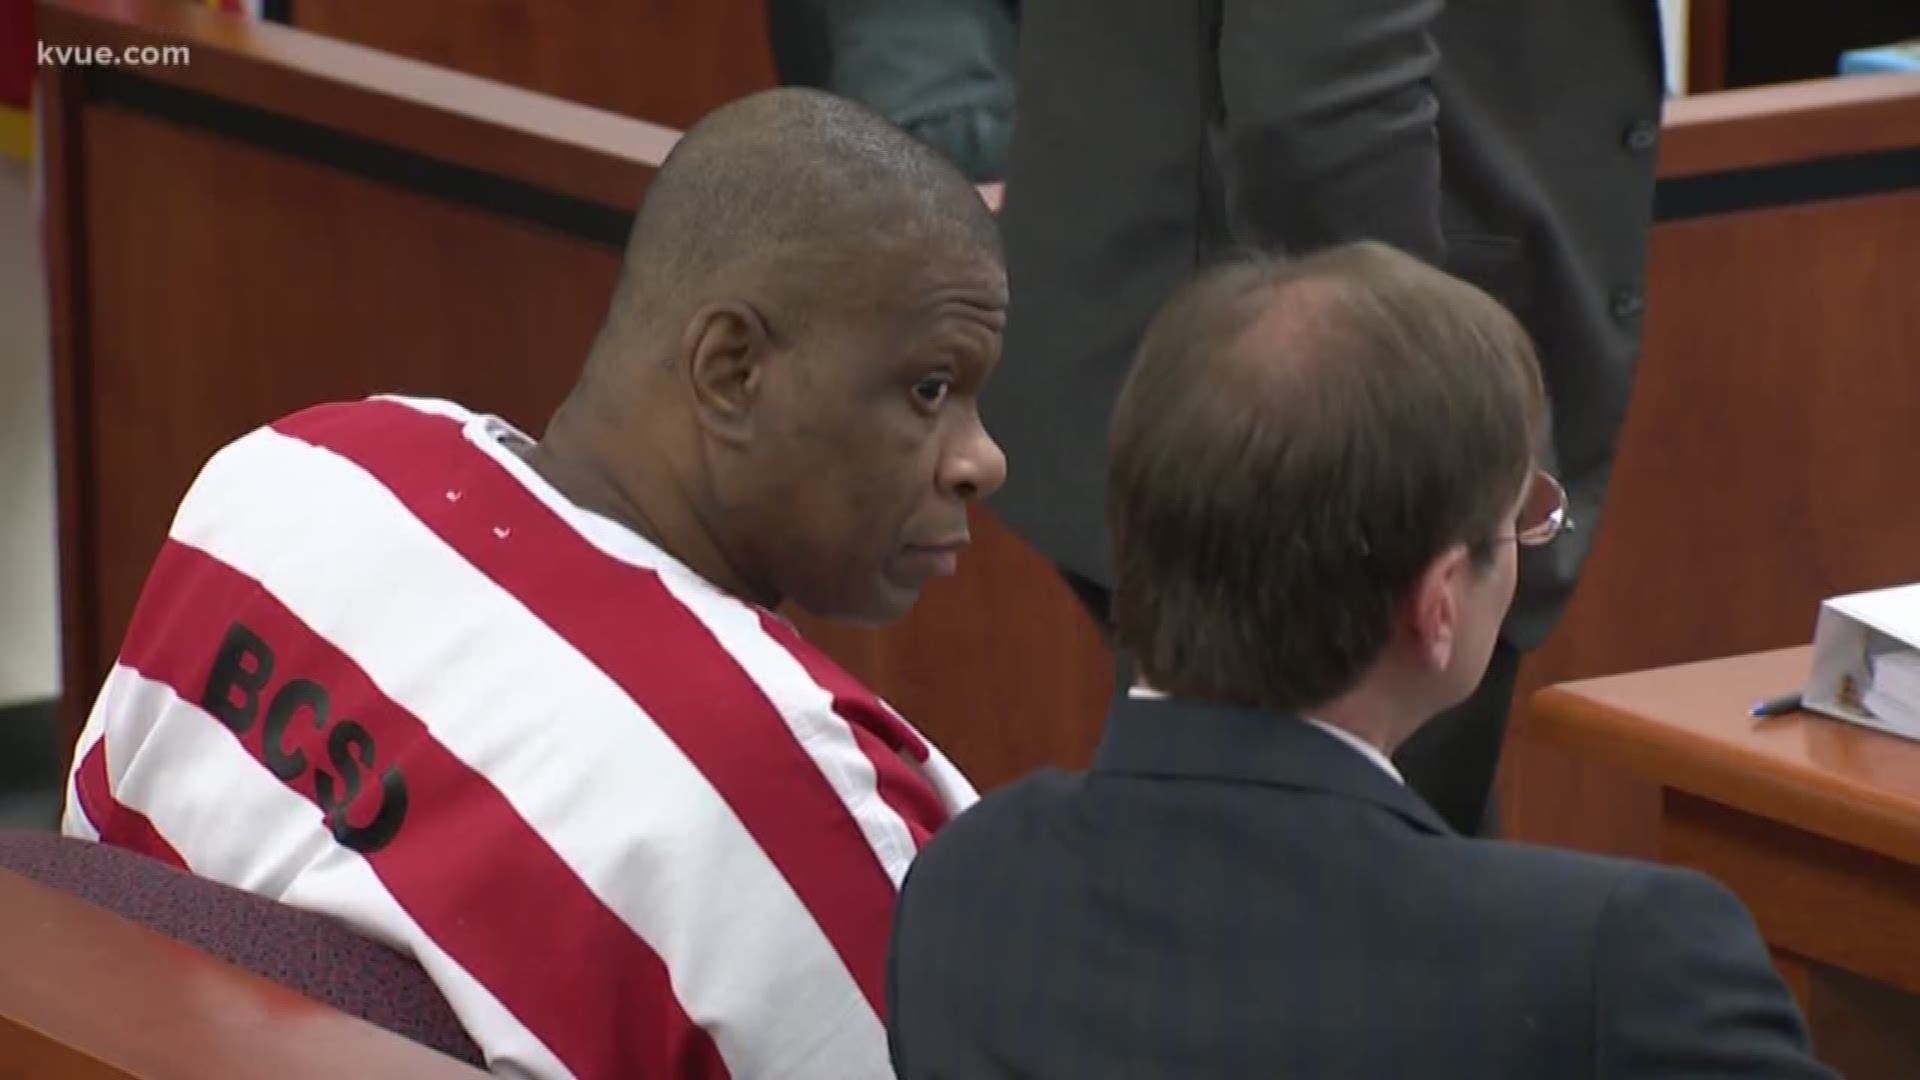 A Bastrop judge is suggesting a new trial for death row inmate, Rodney Reed, be denied.